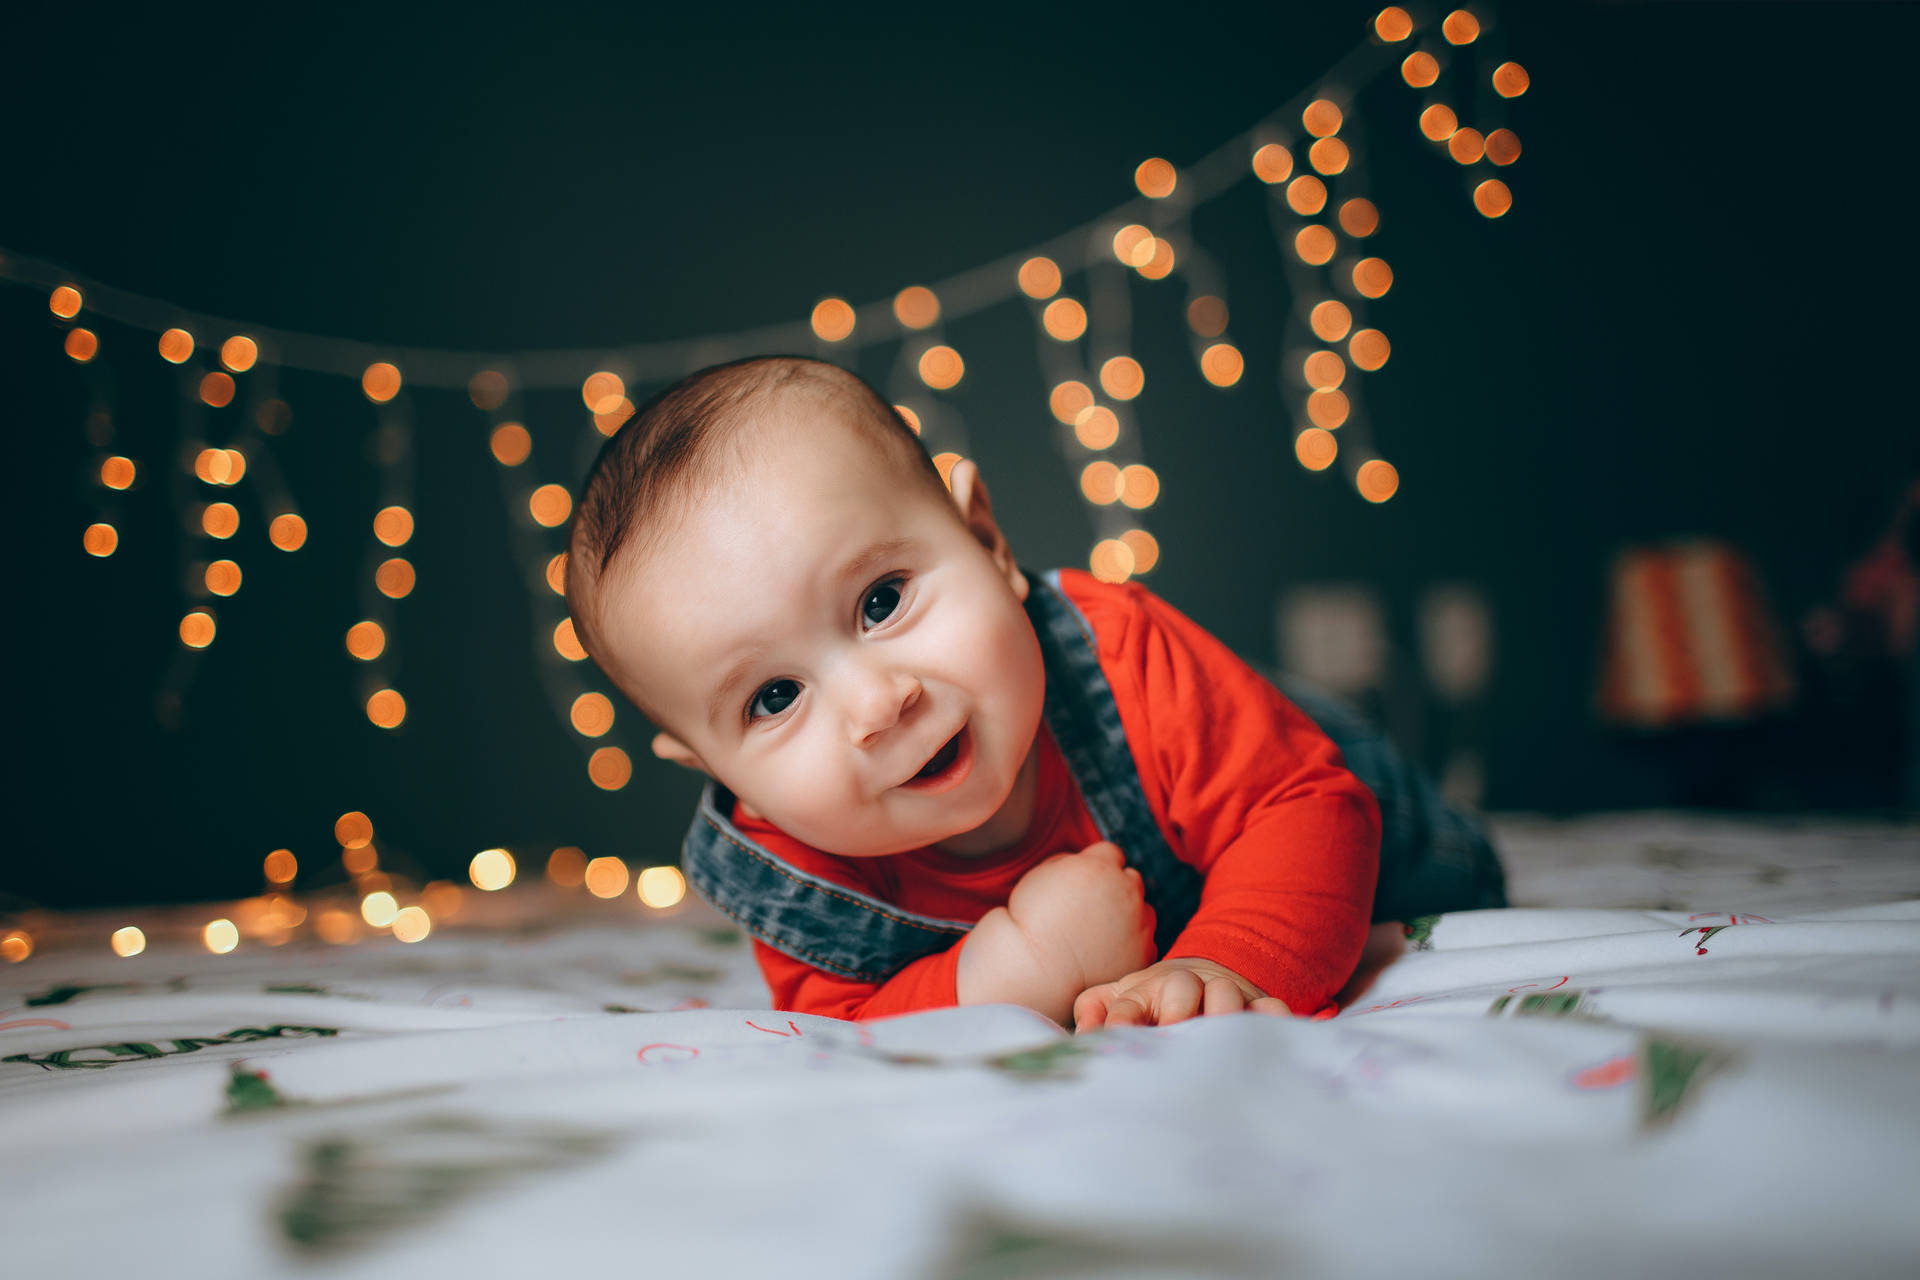 Very Cute Baby With Christmas Lights Background